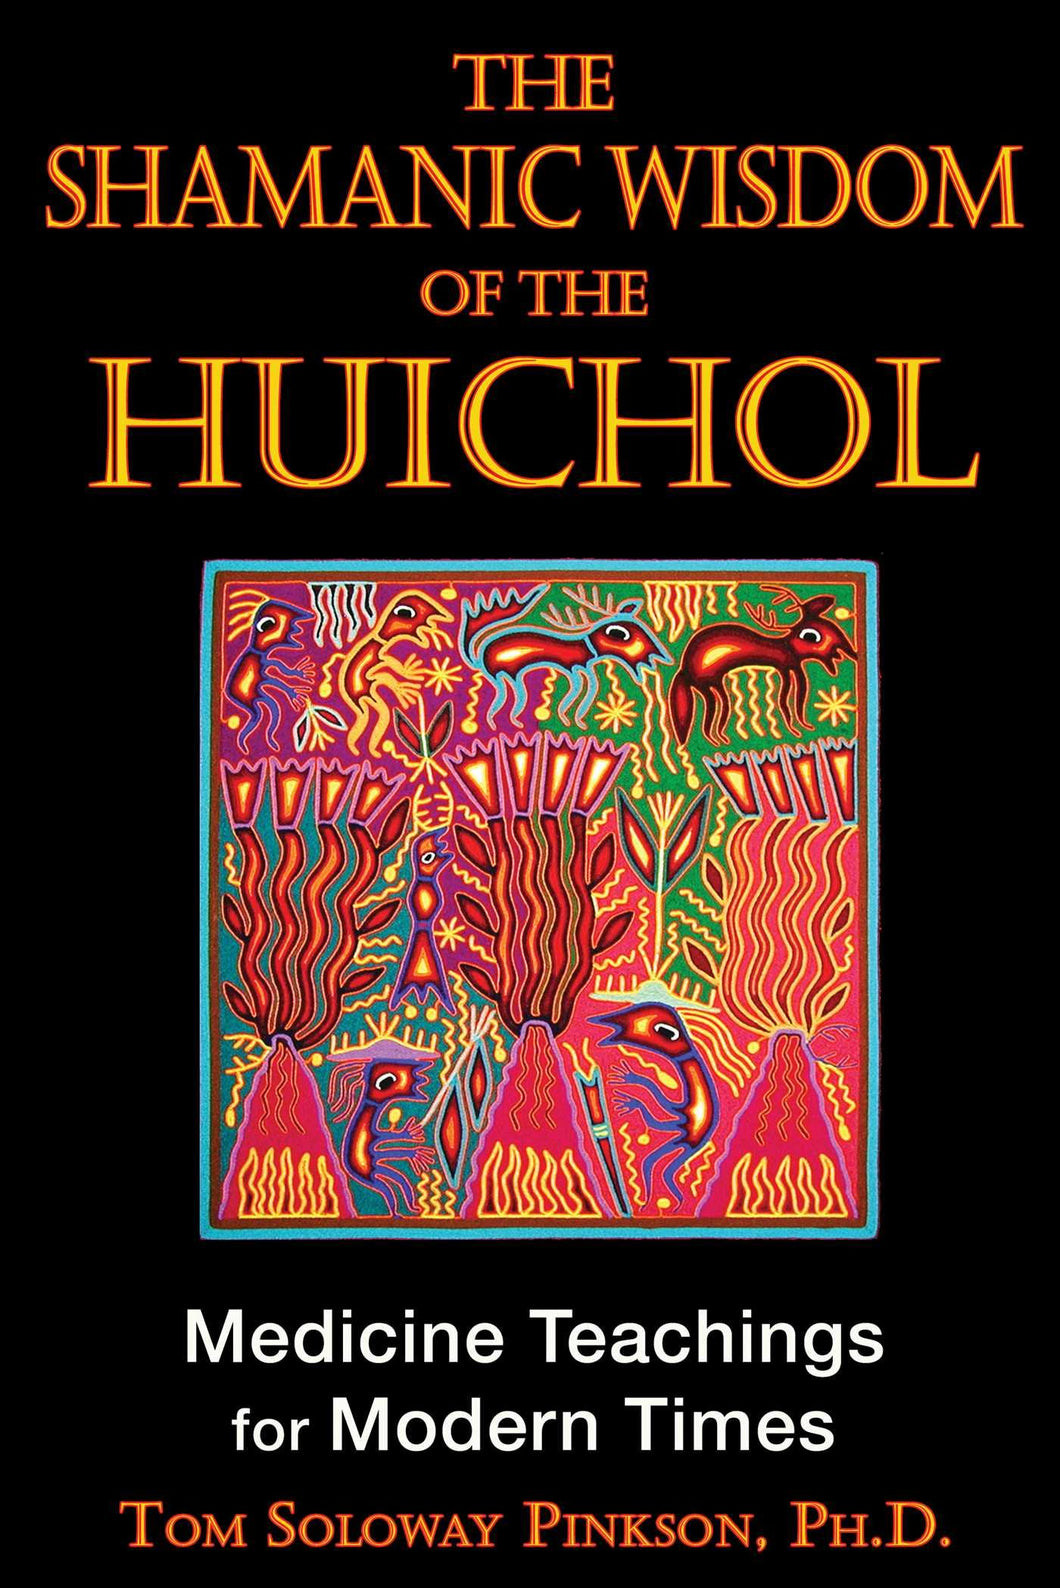 The Shamanic Wisdom of the Huichol: Medicine Teachings for Modern Times (2nd Edition) by Tom Soloway Pinkson